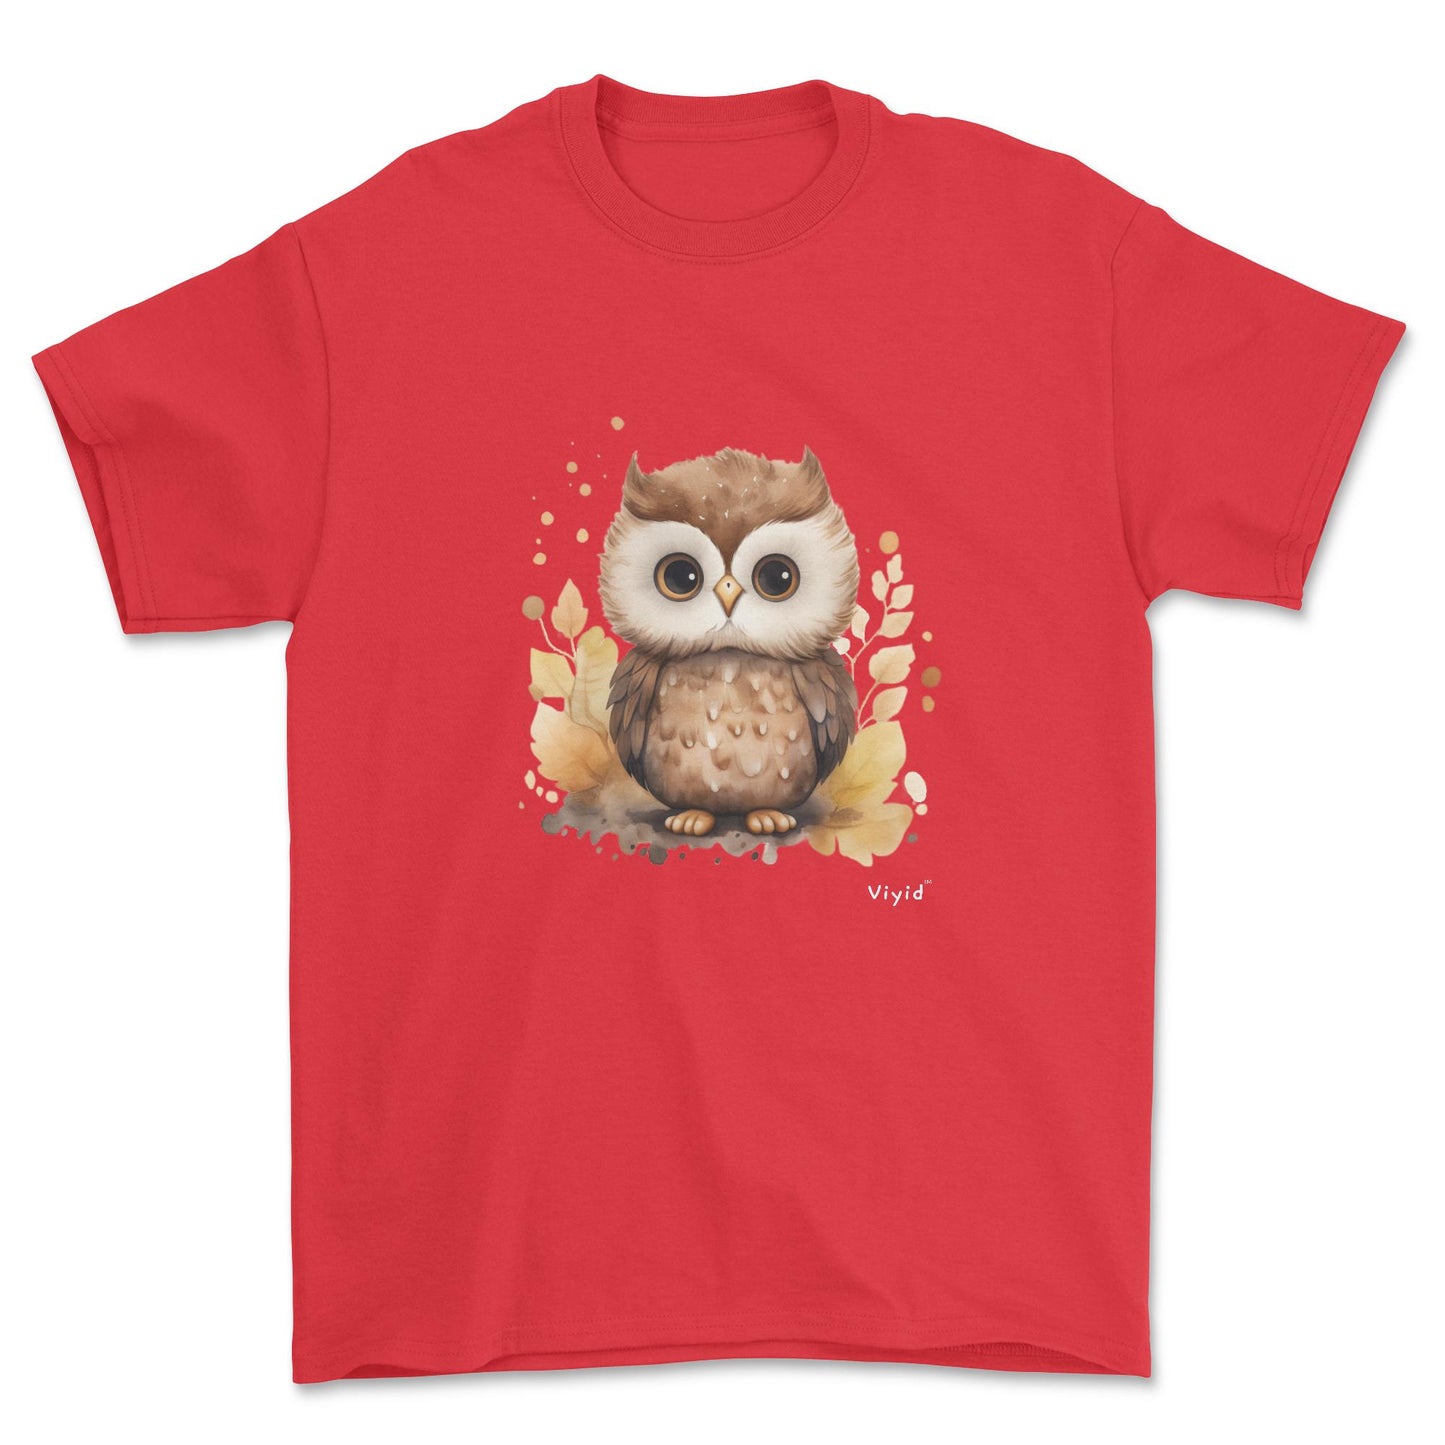 nocturnal owl adult t-shirt red